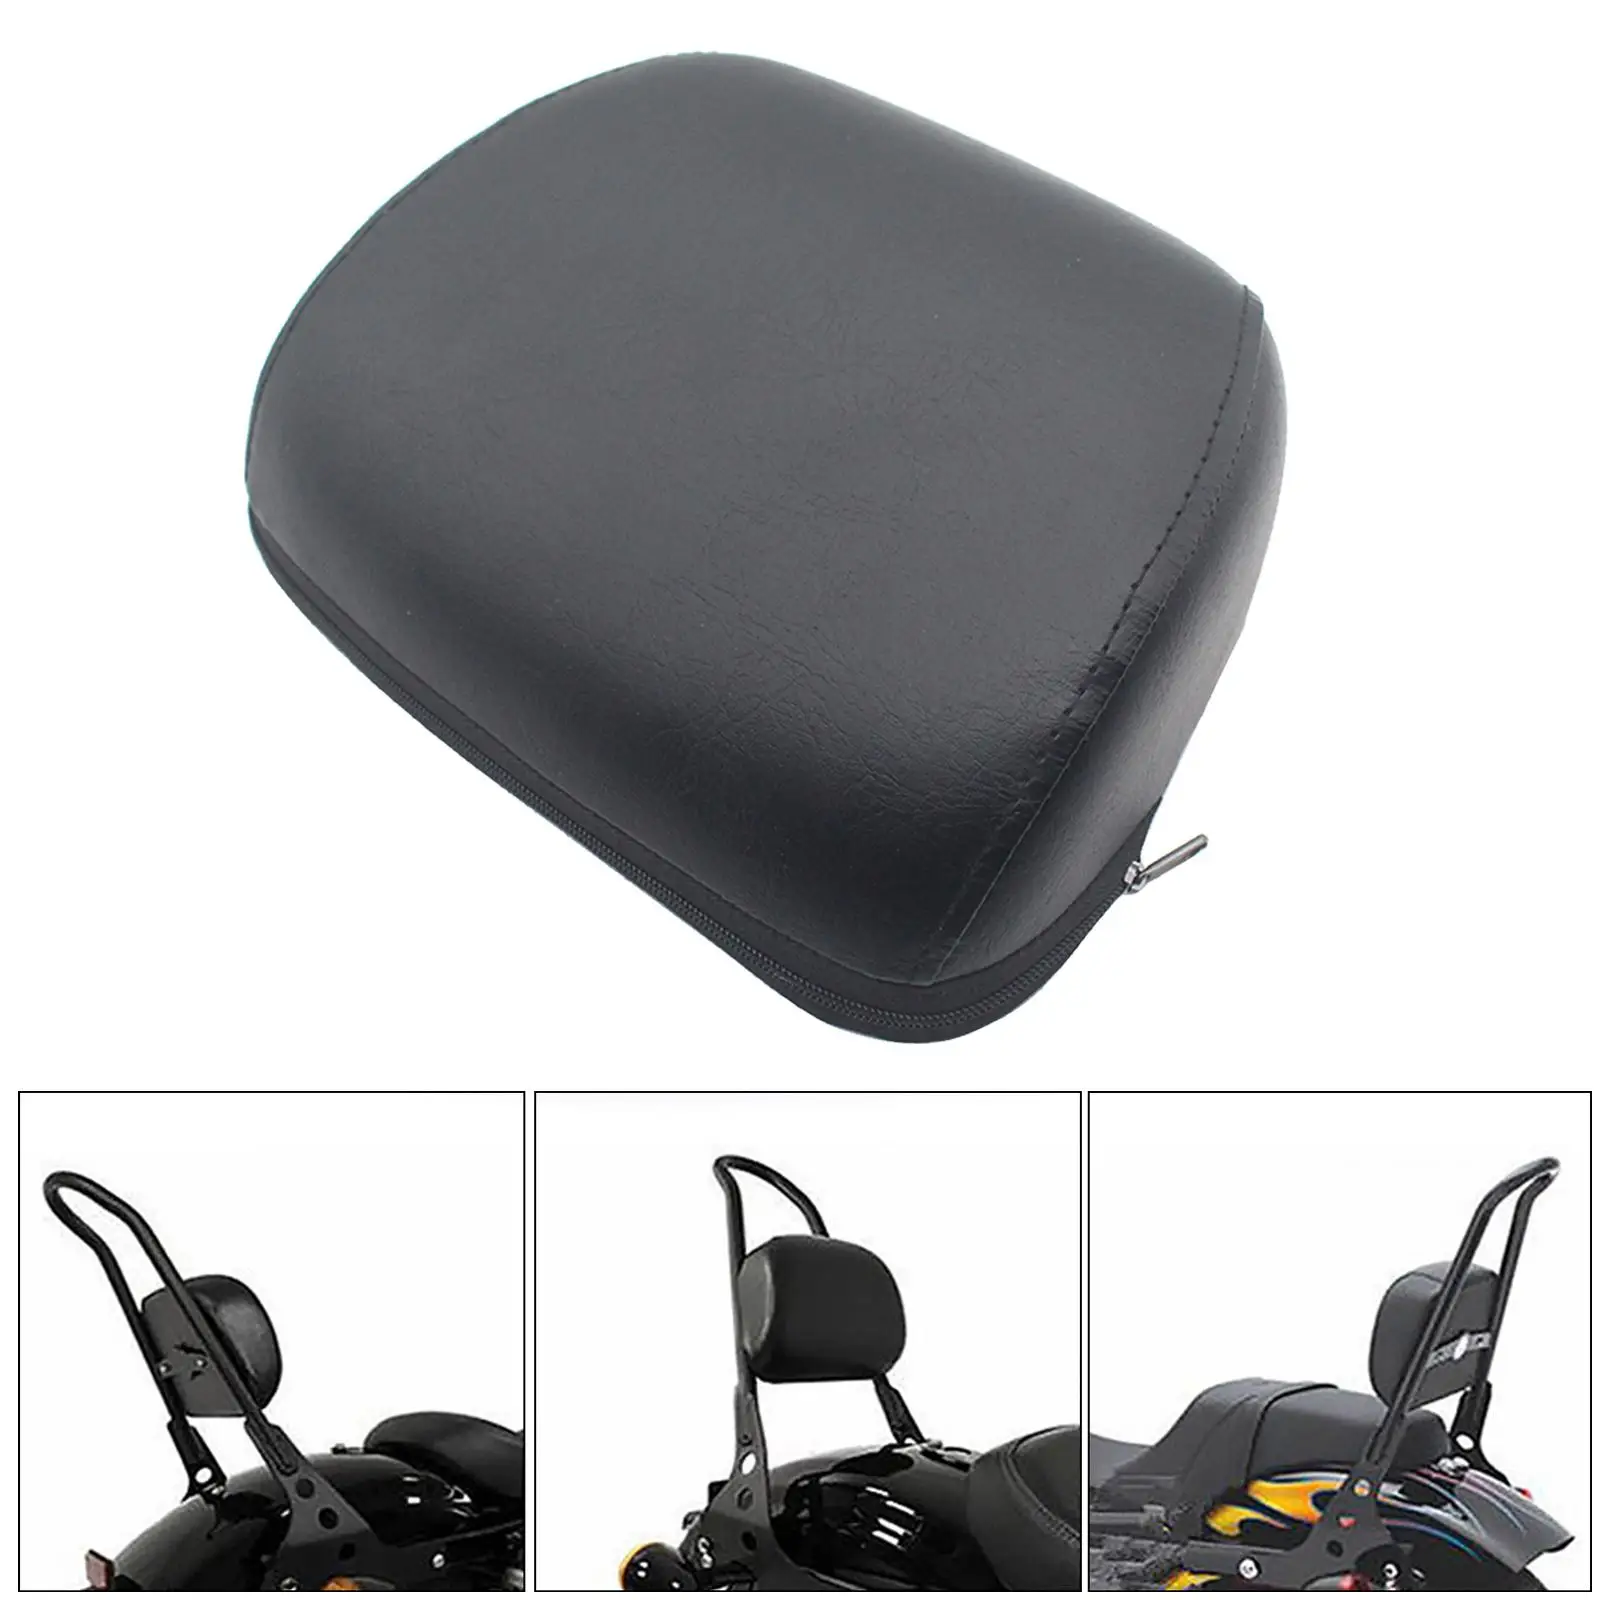 Backrest Pad Universal PU Leather for 883 1200 48 Motorcycle Parts